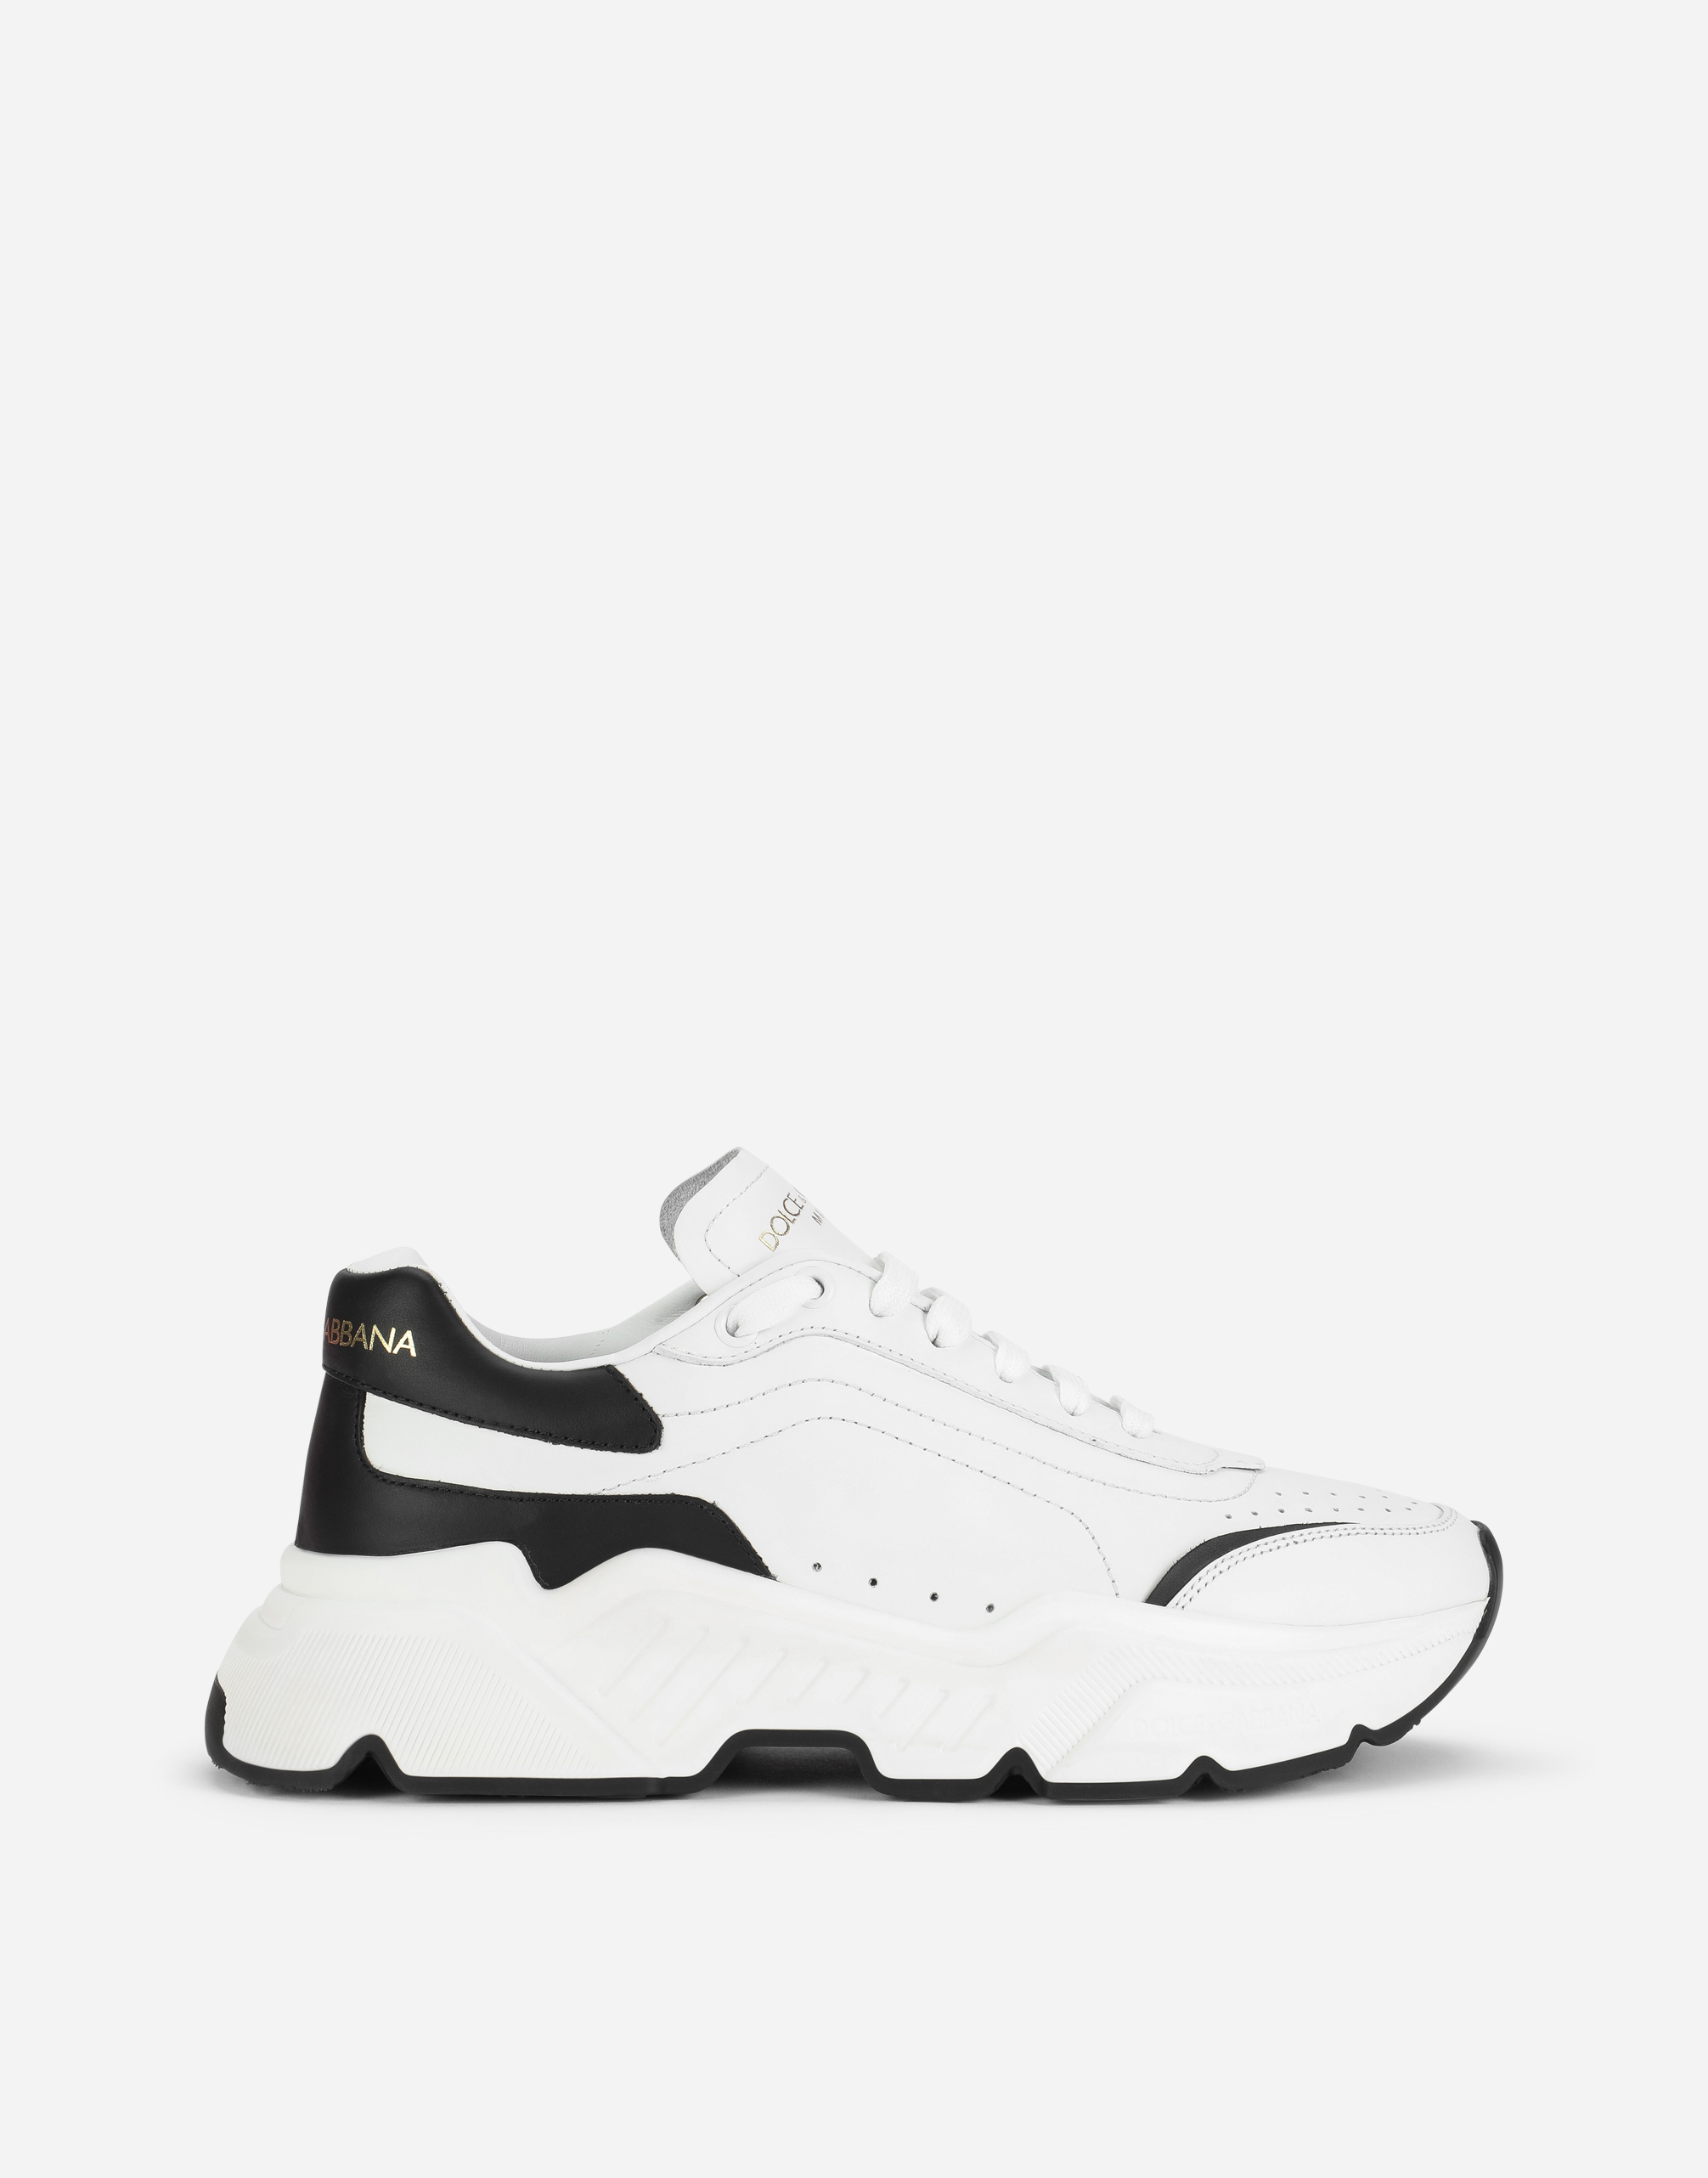 Nappa leather Daymaster sneakers in White/Black